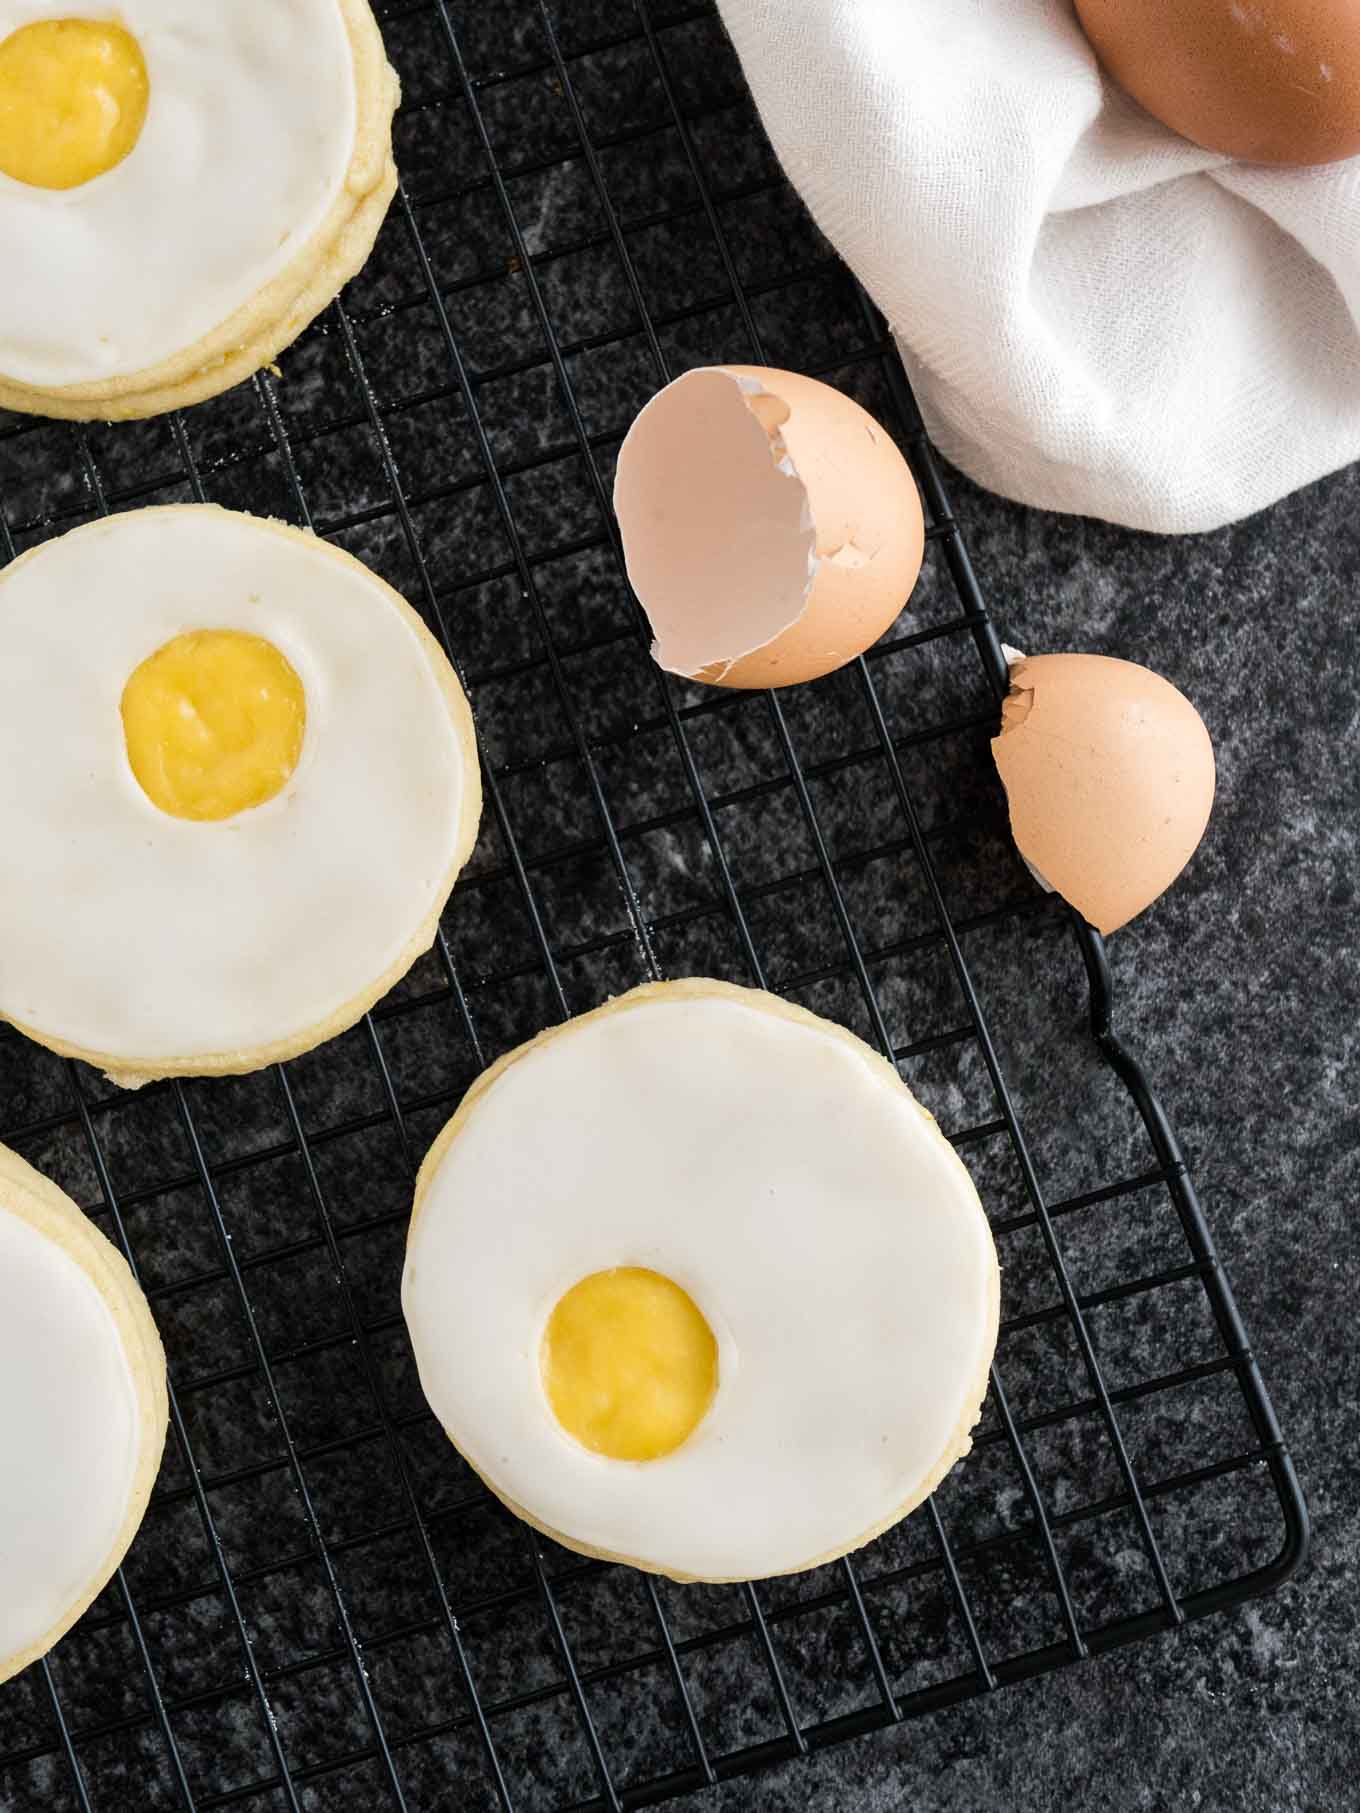 Several easter sugar cookies with lemon curd (resembling a sunny side up egg) on a black cooling rack with some eggshells and a white dishtowel next to it.